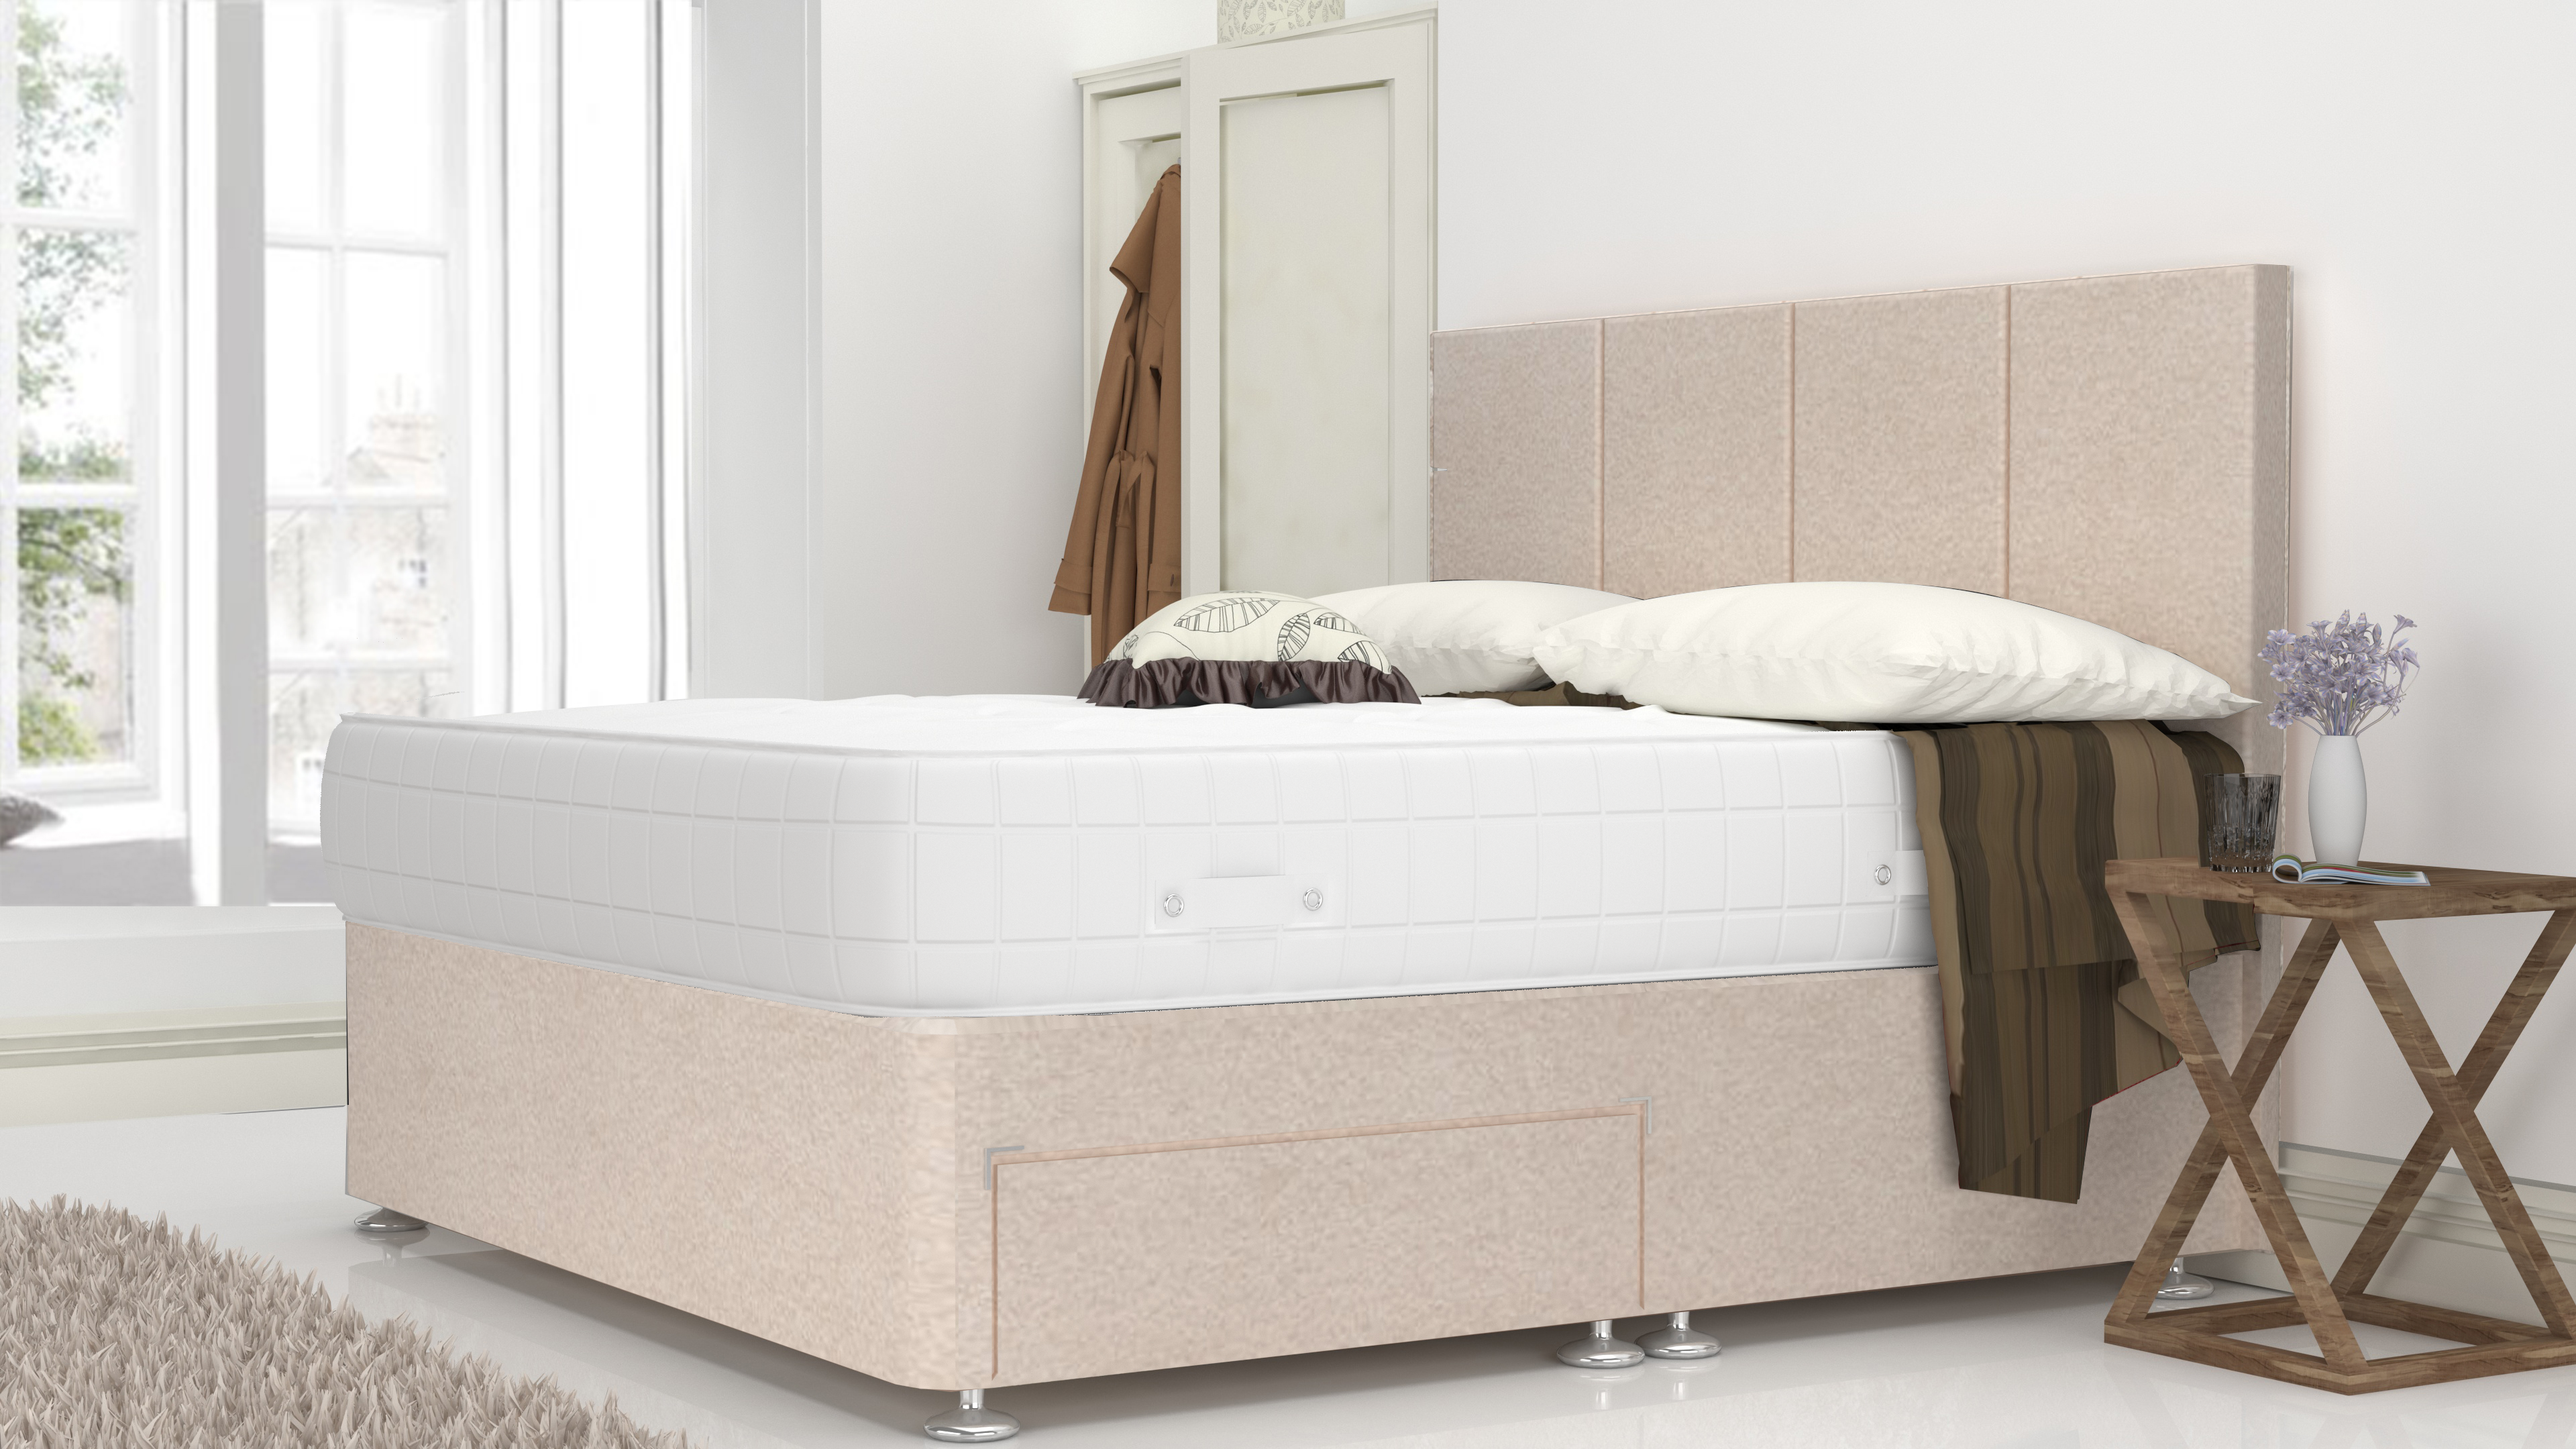 Cream Chanille 3 Feet Divan Bed Set With 4 Panel Headboard (Included Feet) And Free Tinsel Top Mattress